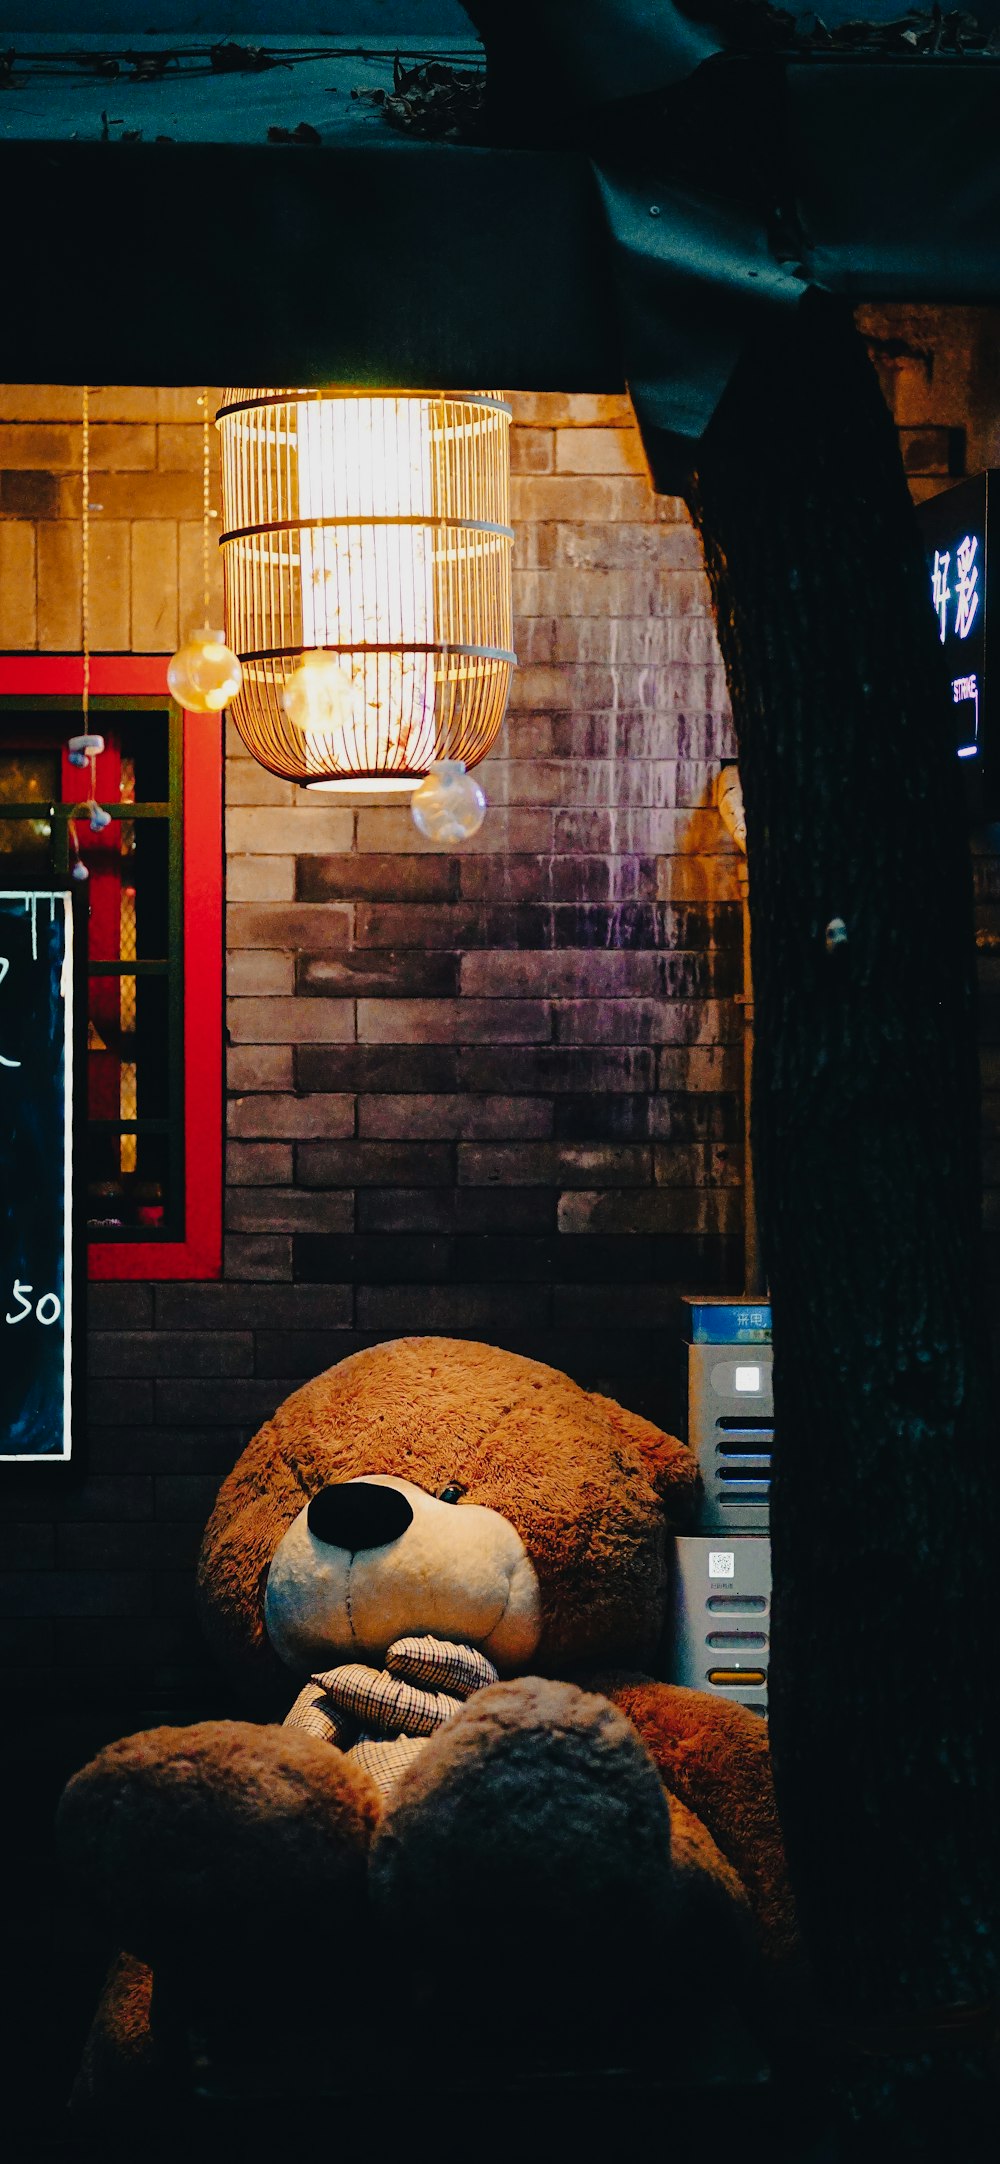 a large teddy bear sitting in front of a brick wall